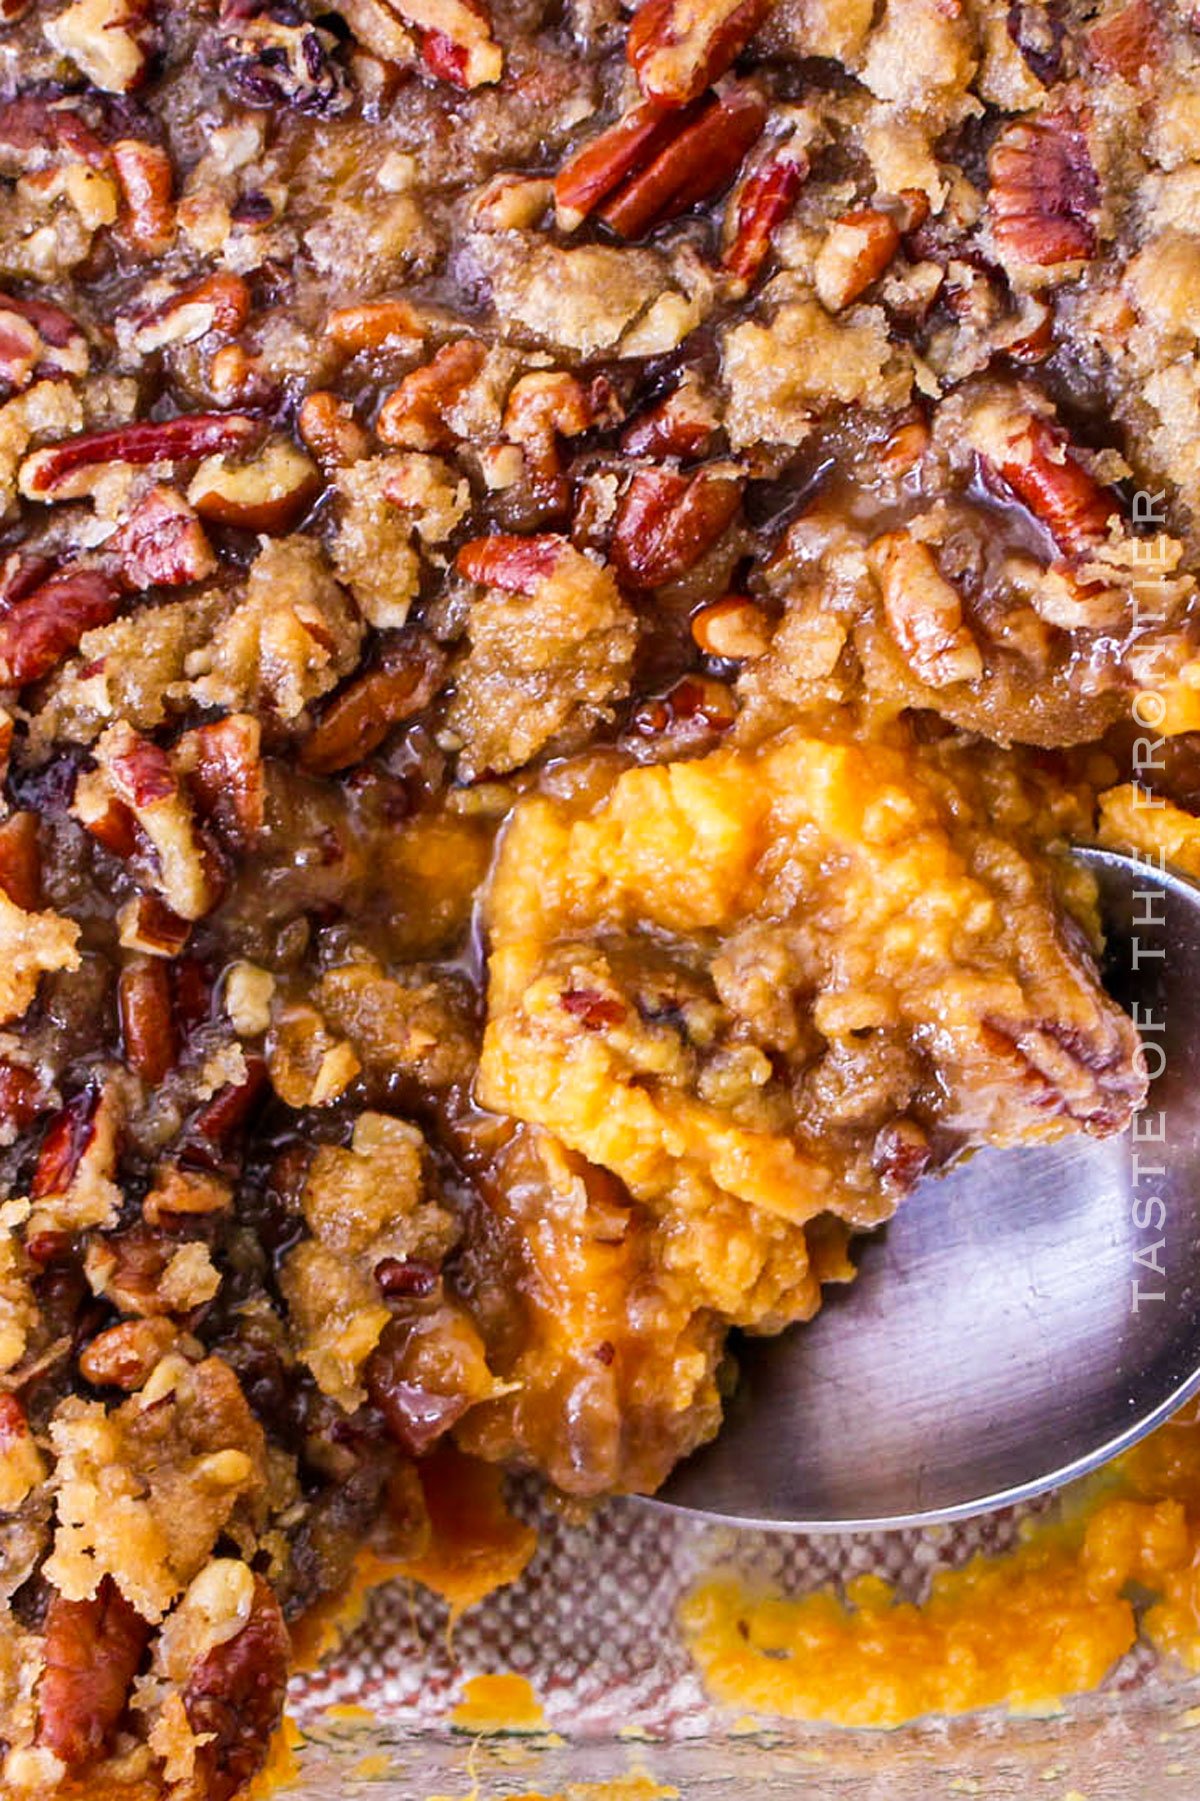 thanksgiing casserole with pecans